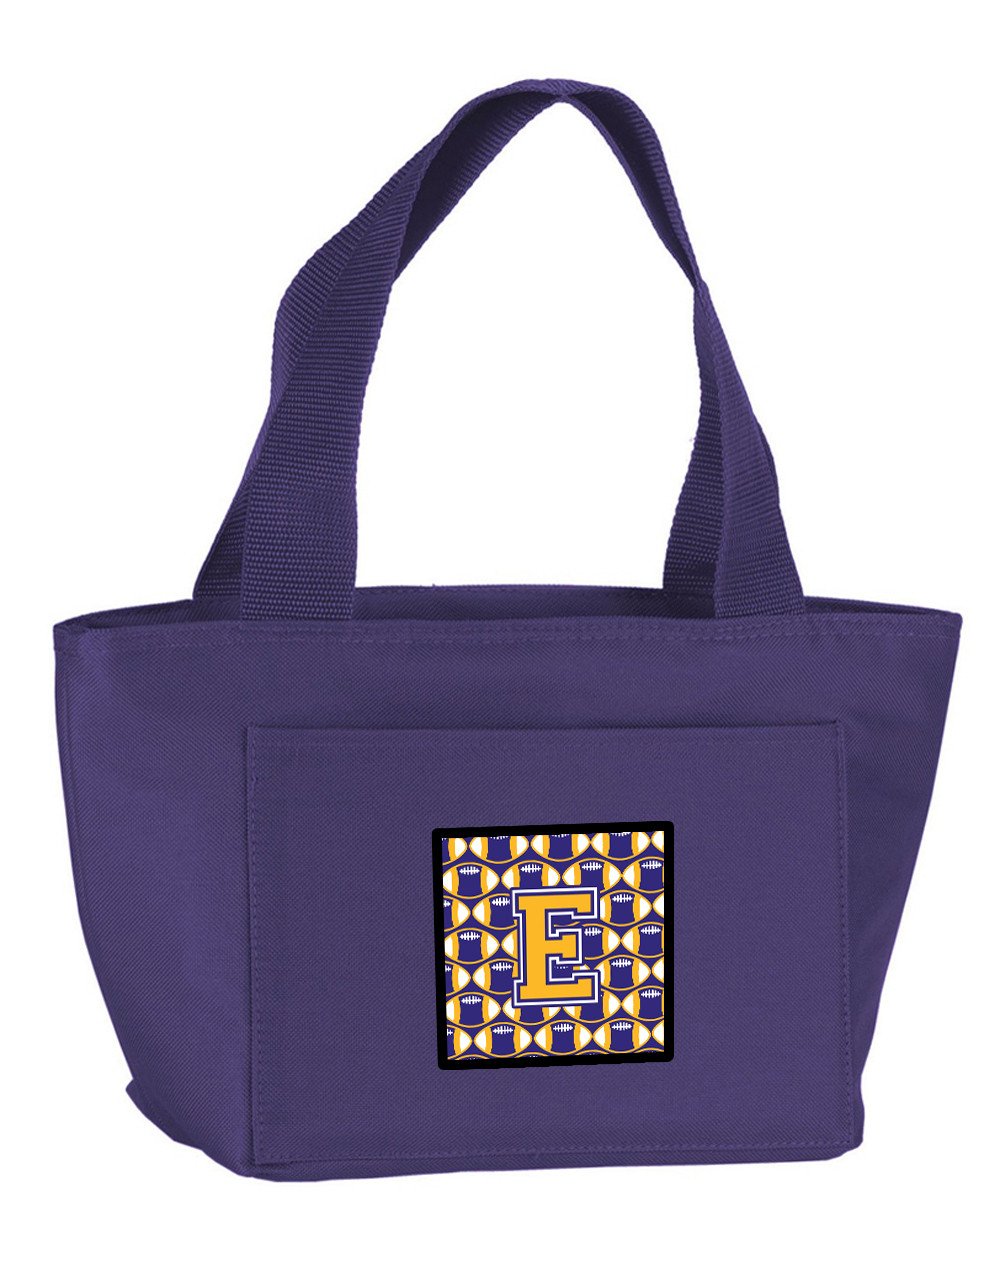 Letter E Football Purple and Gold Lunch Bag CJ1064-EPR-8808 by Caroline's Treasures